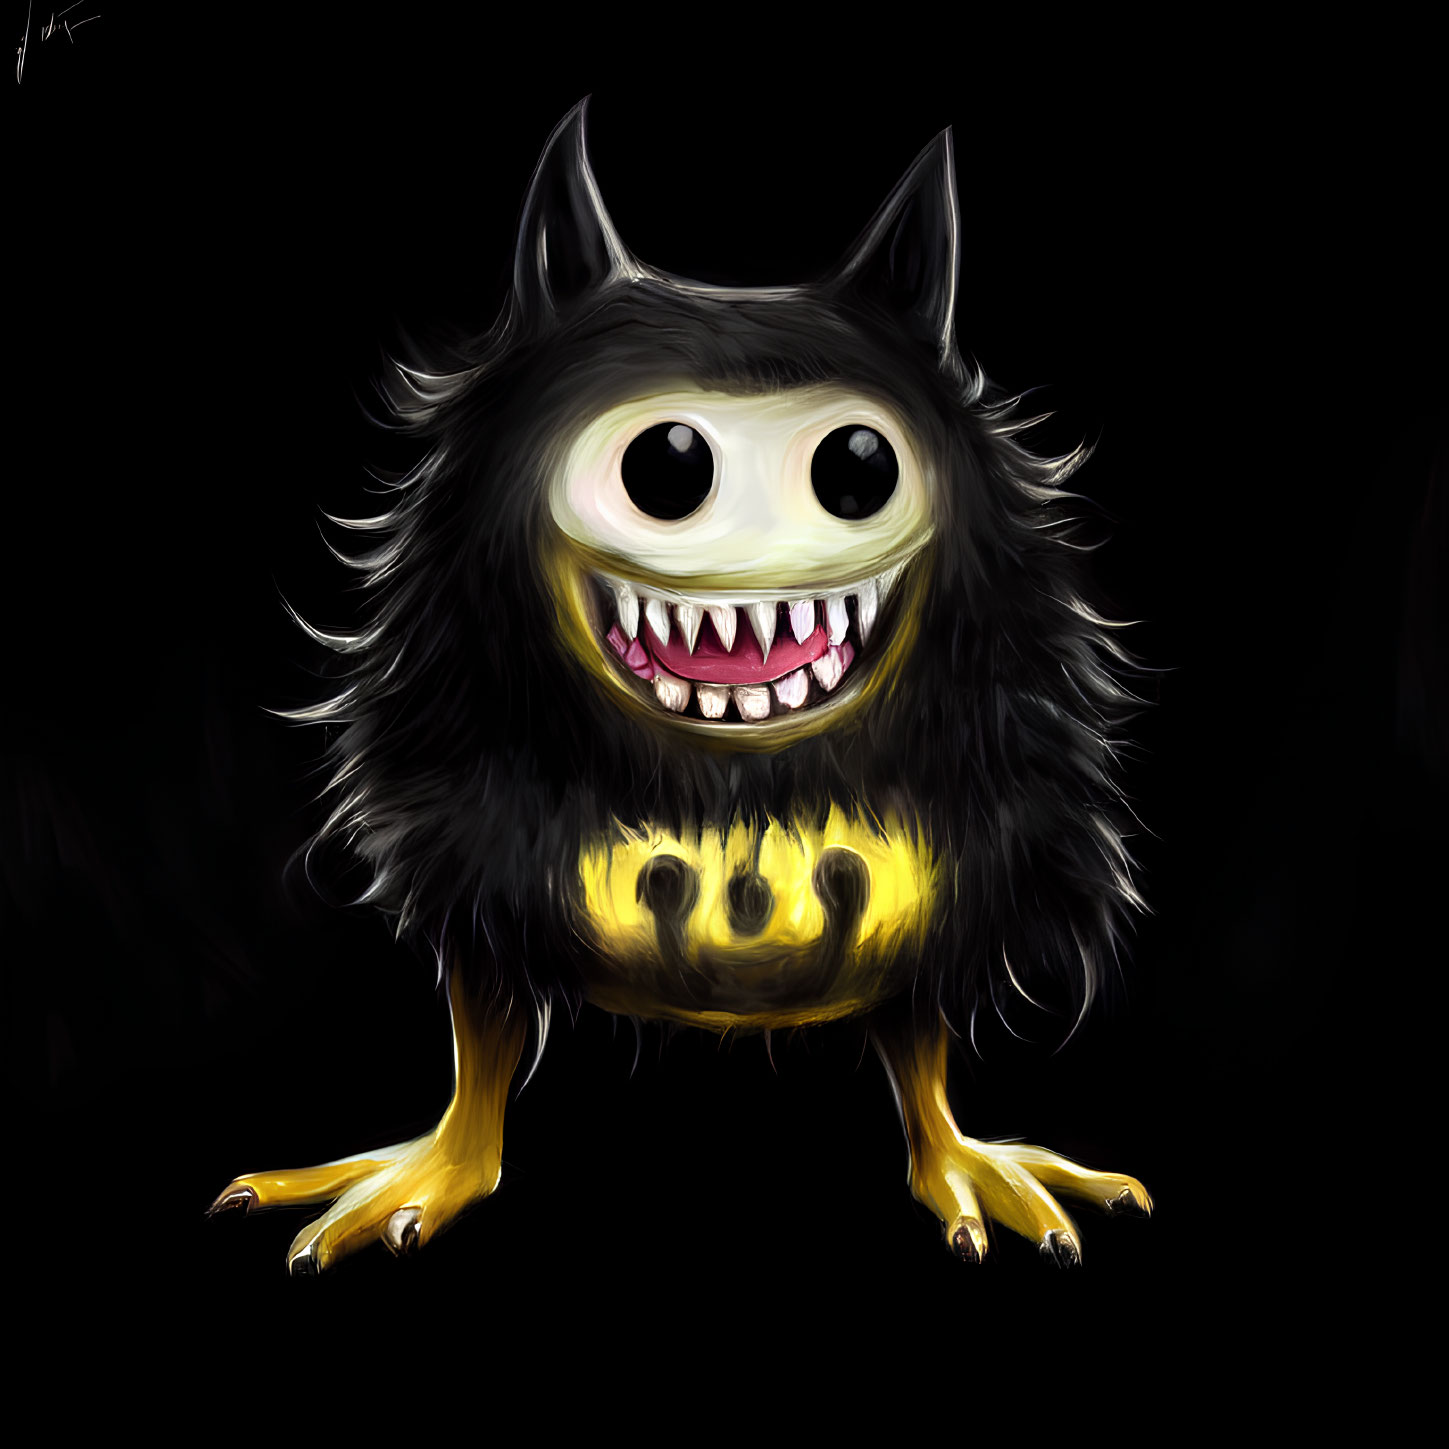 Fuzzy creature with big eyes and pointy ears in black and yellow palette